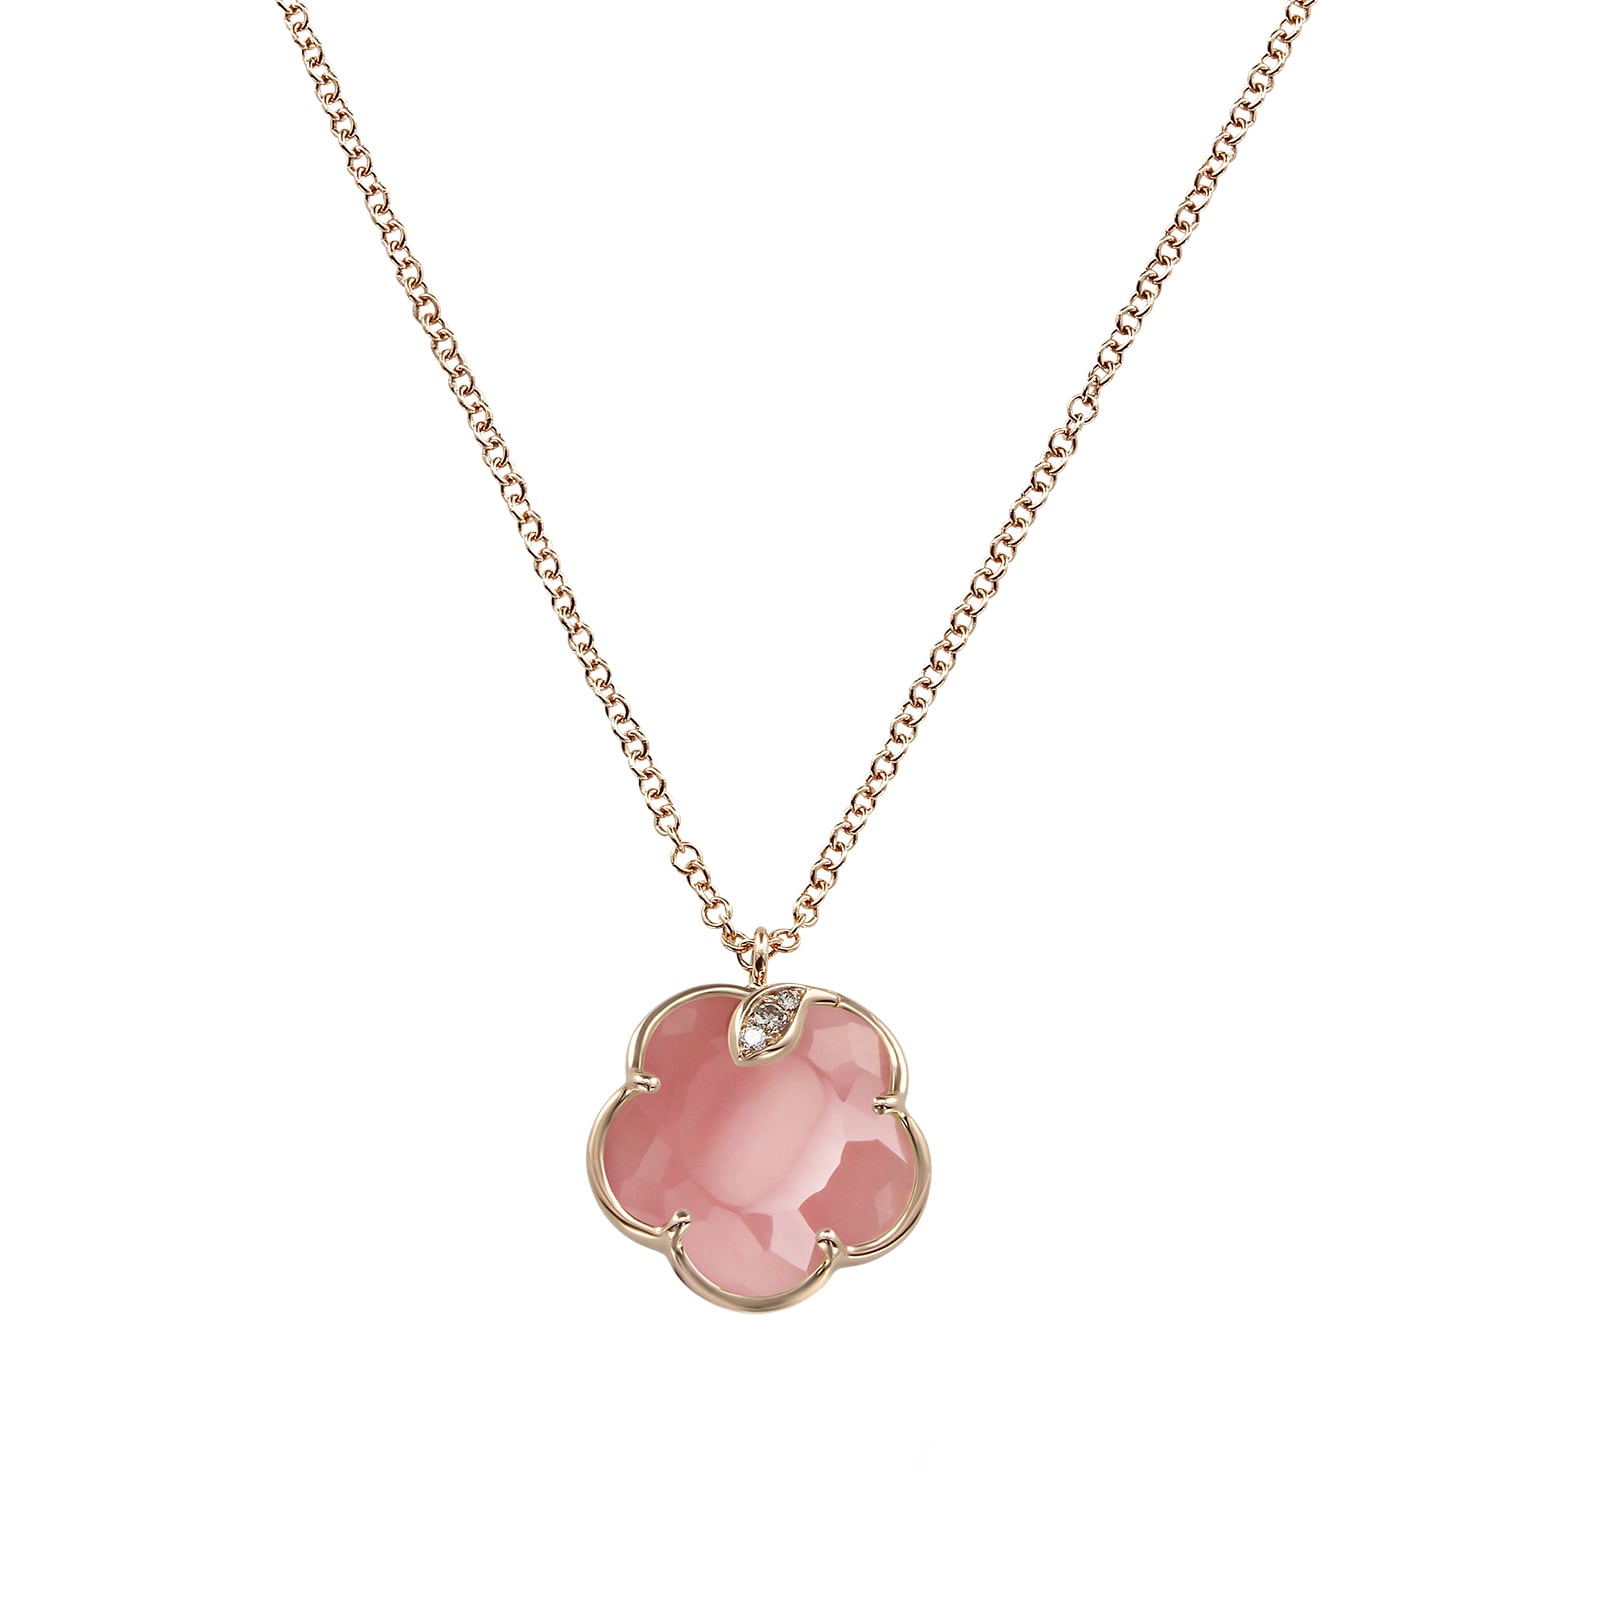 Petit Joli Necklace in 18ct Rose Gold with Pink Chalcedony and Diamonds